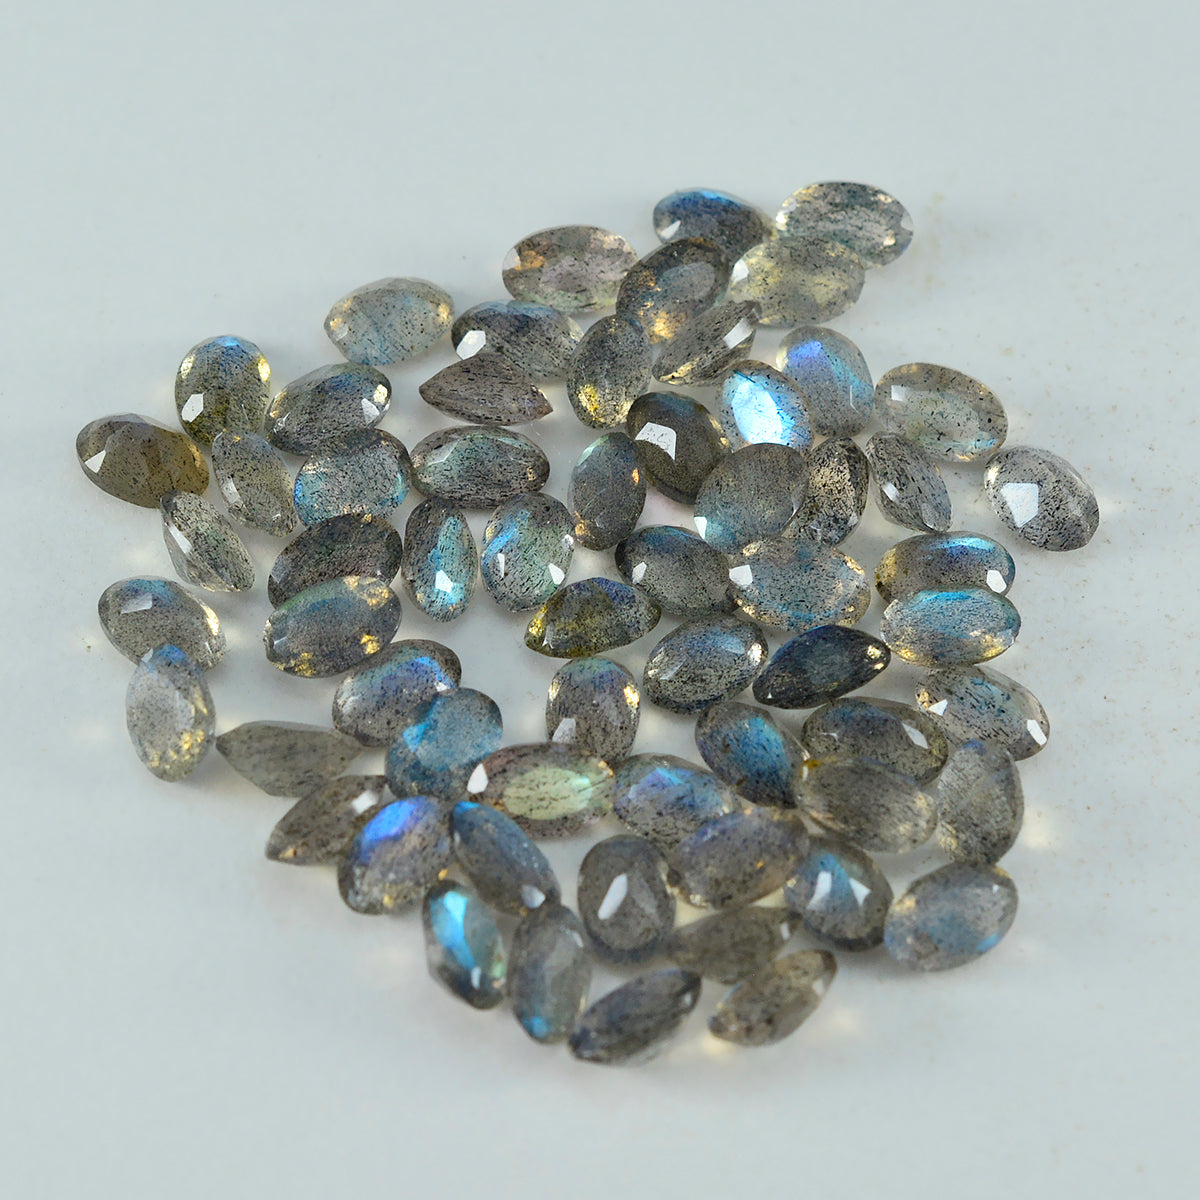 Riyogems 1PC Real Grey Labradorite Faceted 3x5 mm Oval Shape A+ Quality Stone